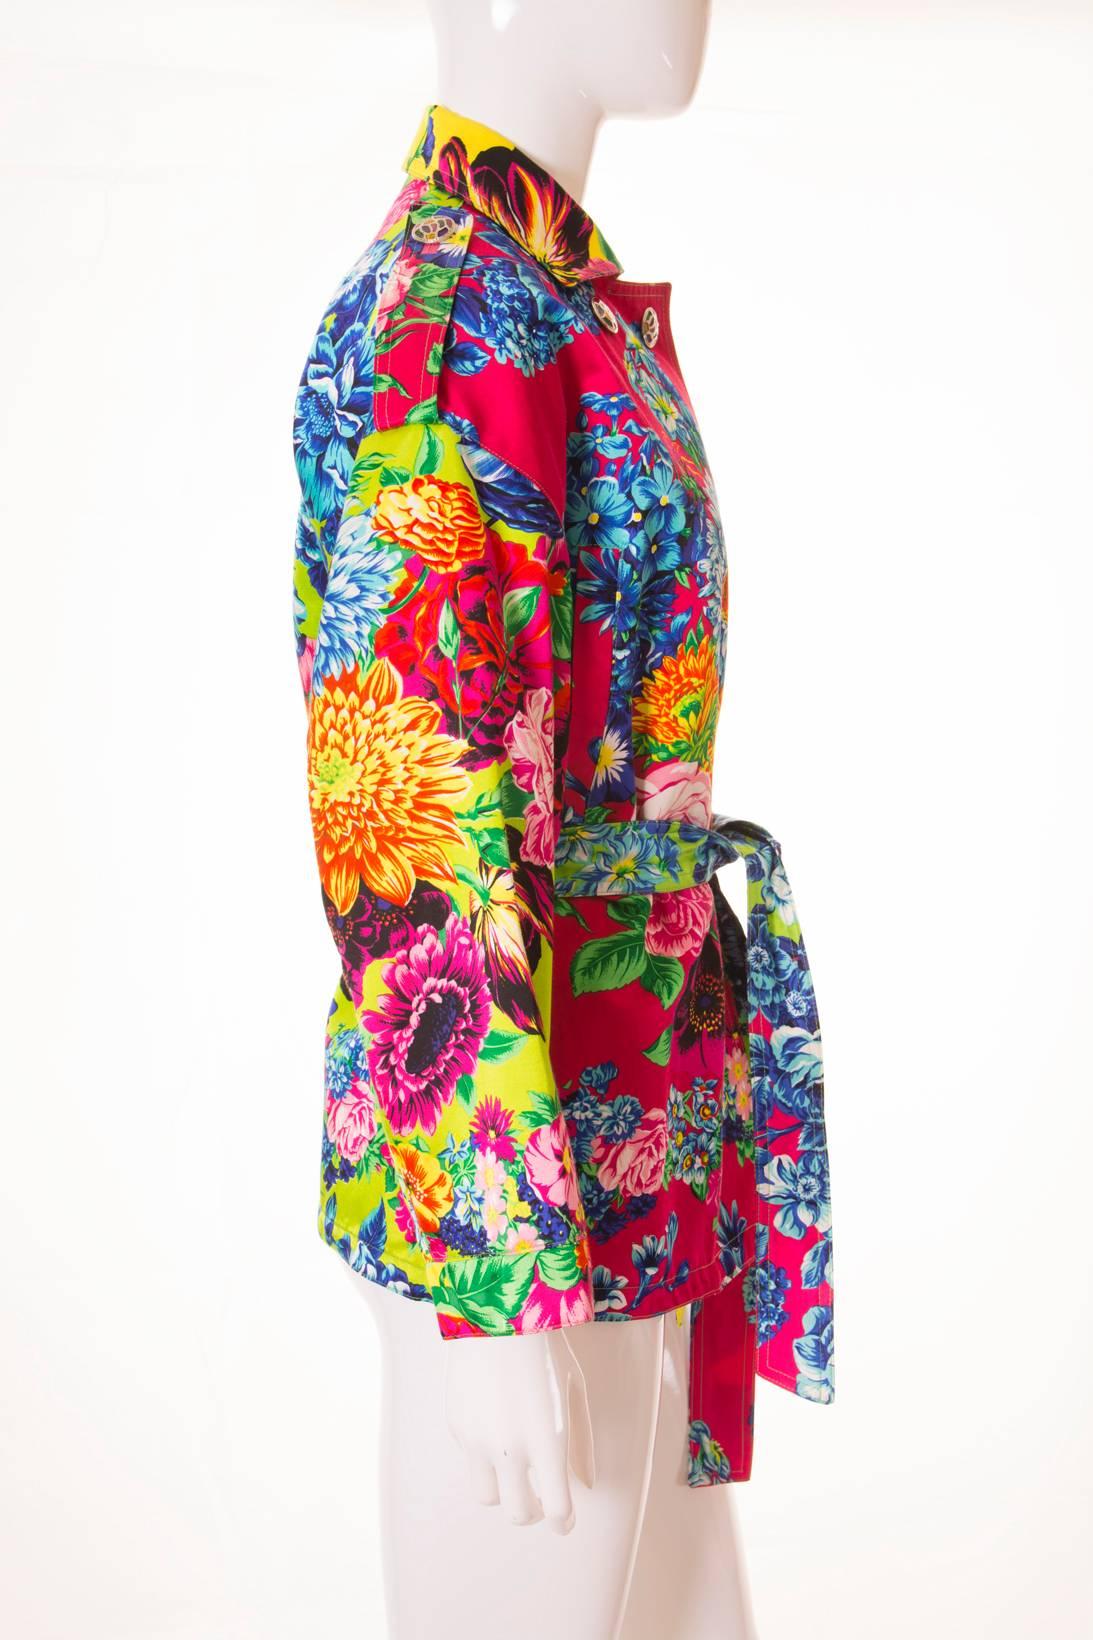 A truly lush jacket by Versus Versace. This jacket features a tropical inspired Hibiscus print in bright shades. We love the mix of acid yellow, lime green and magenta on this piece. The coat has a tie waist and multi coloured silver mosaic buttons.